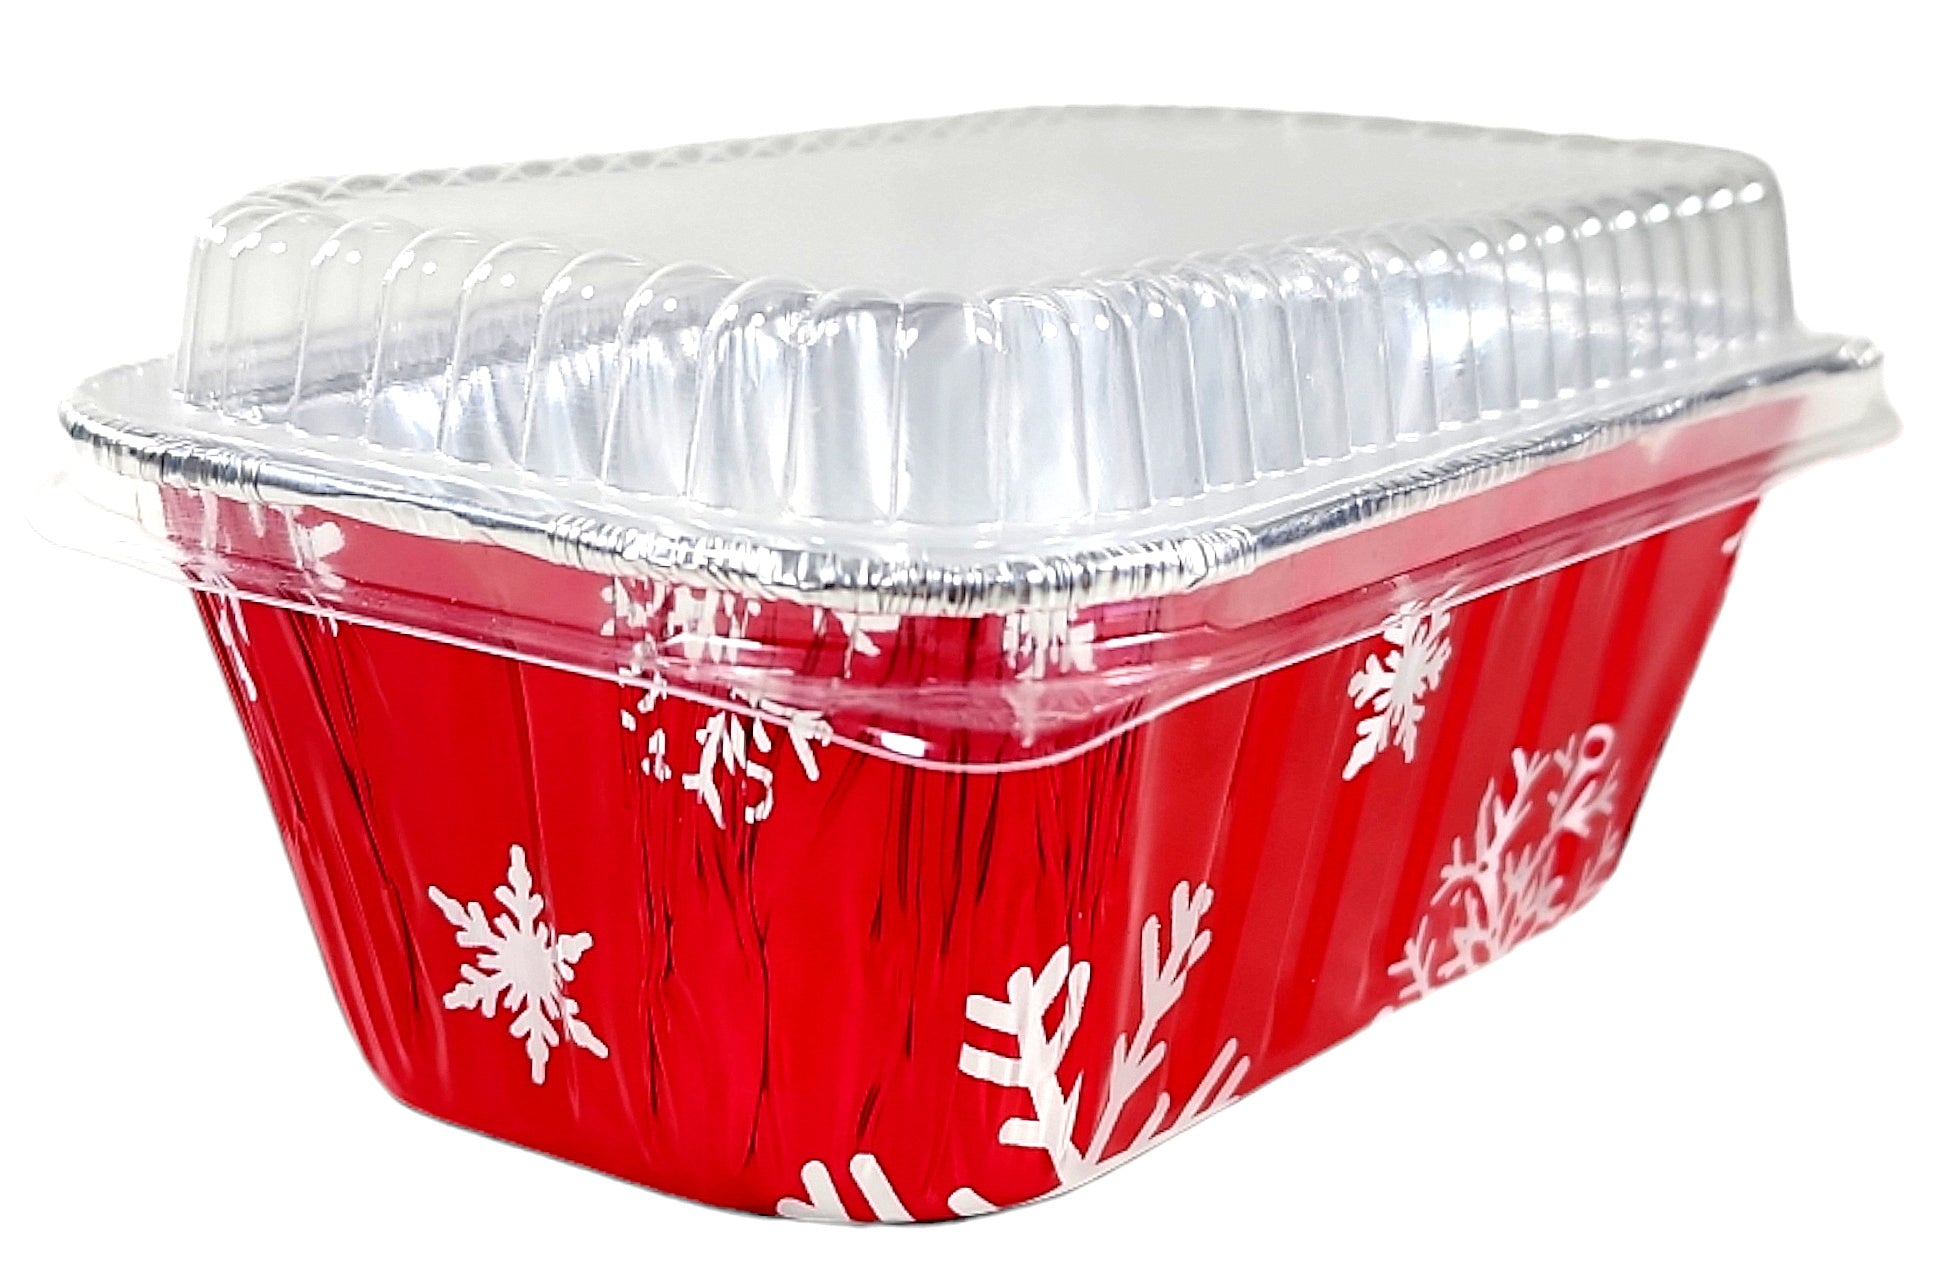 Square Pie Tart Small Tin Foil Pans (red Gold Silver) Disposable